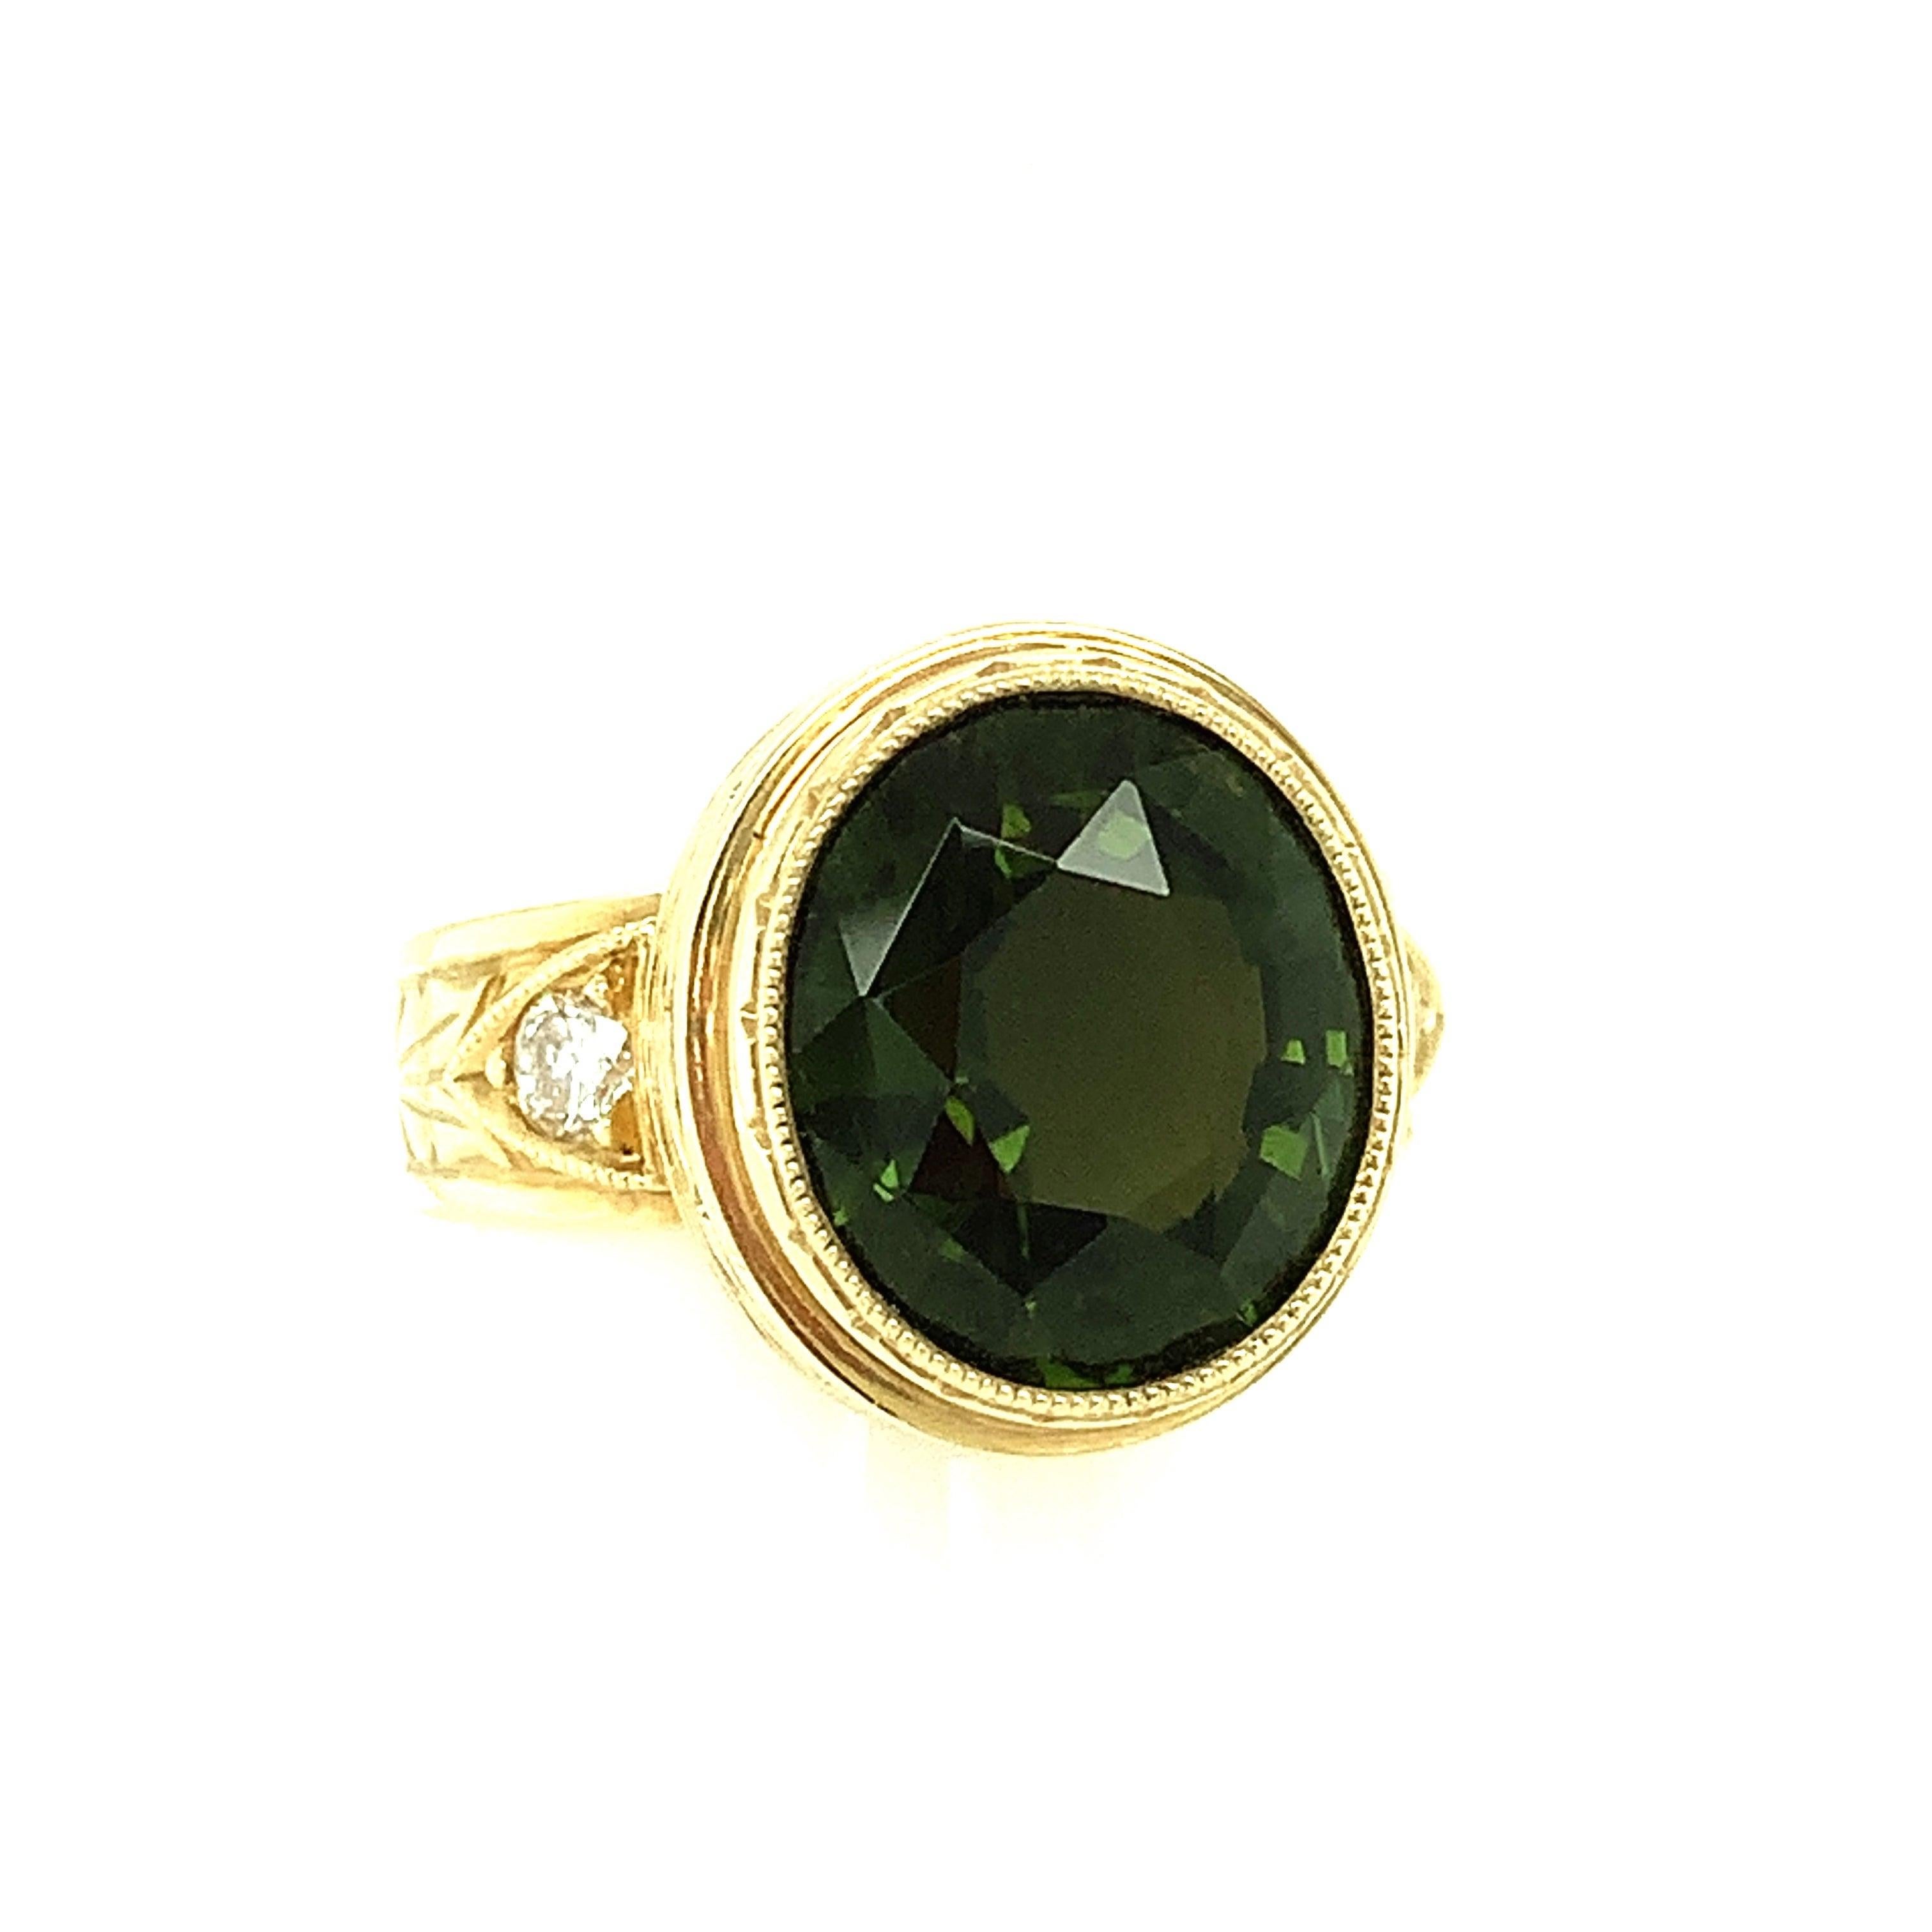 This handmade 18k yellow gold ring features a beautifully crystalline, 5.20 carat oval tourmaline with gorgeous, rich green color! The ring was designed to showcase this brilliant gem, whose body color can be described as deep green with hints of